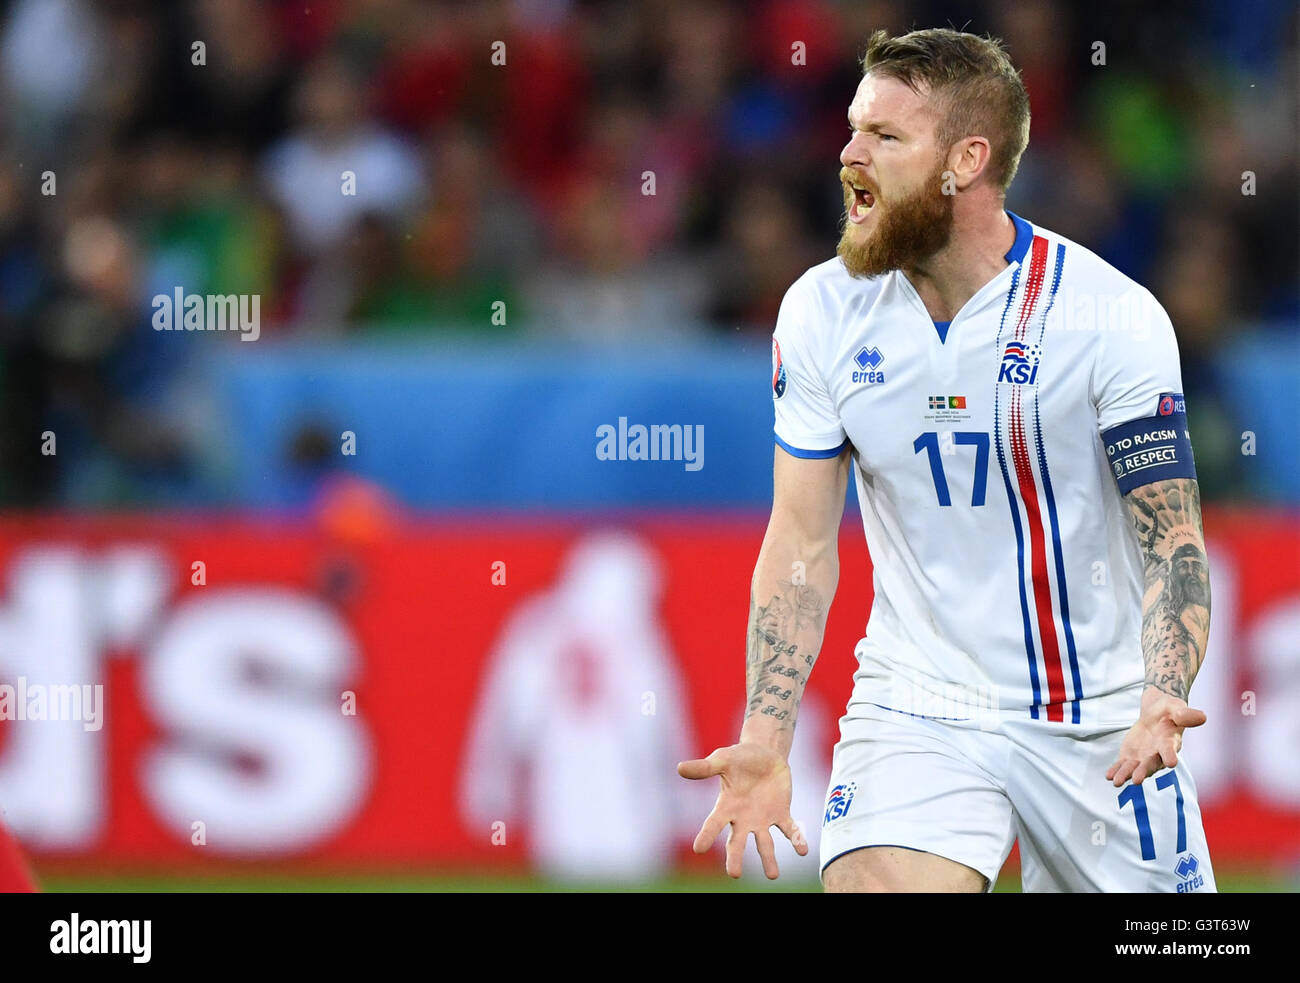 Saint-Etienne, France. 14th June, 2016. Aron Gunnarsson of Iceland gestures during the UEFA Euro 2016 Group F soccer match Portugal vs. Iceland at Stade Geoffroy Guichard in Saint-Etienne, France, 14 June 2016. Photo: Uwe Anspach/dpa/Alamy Live News Stock Photo